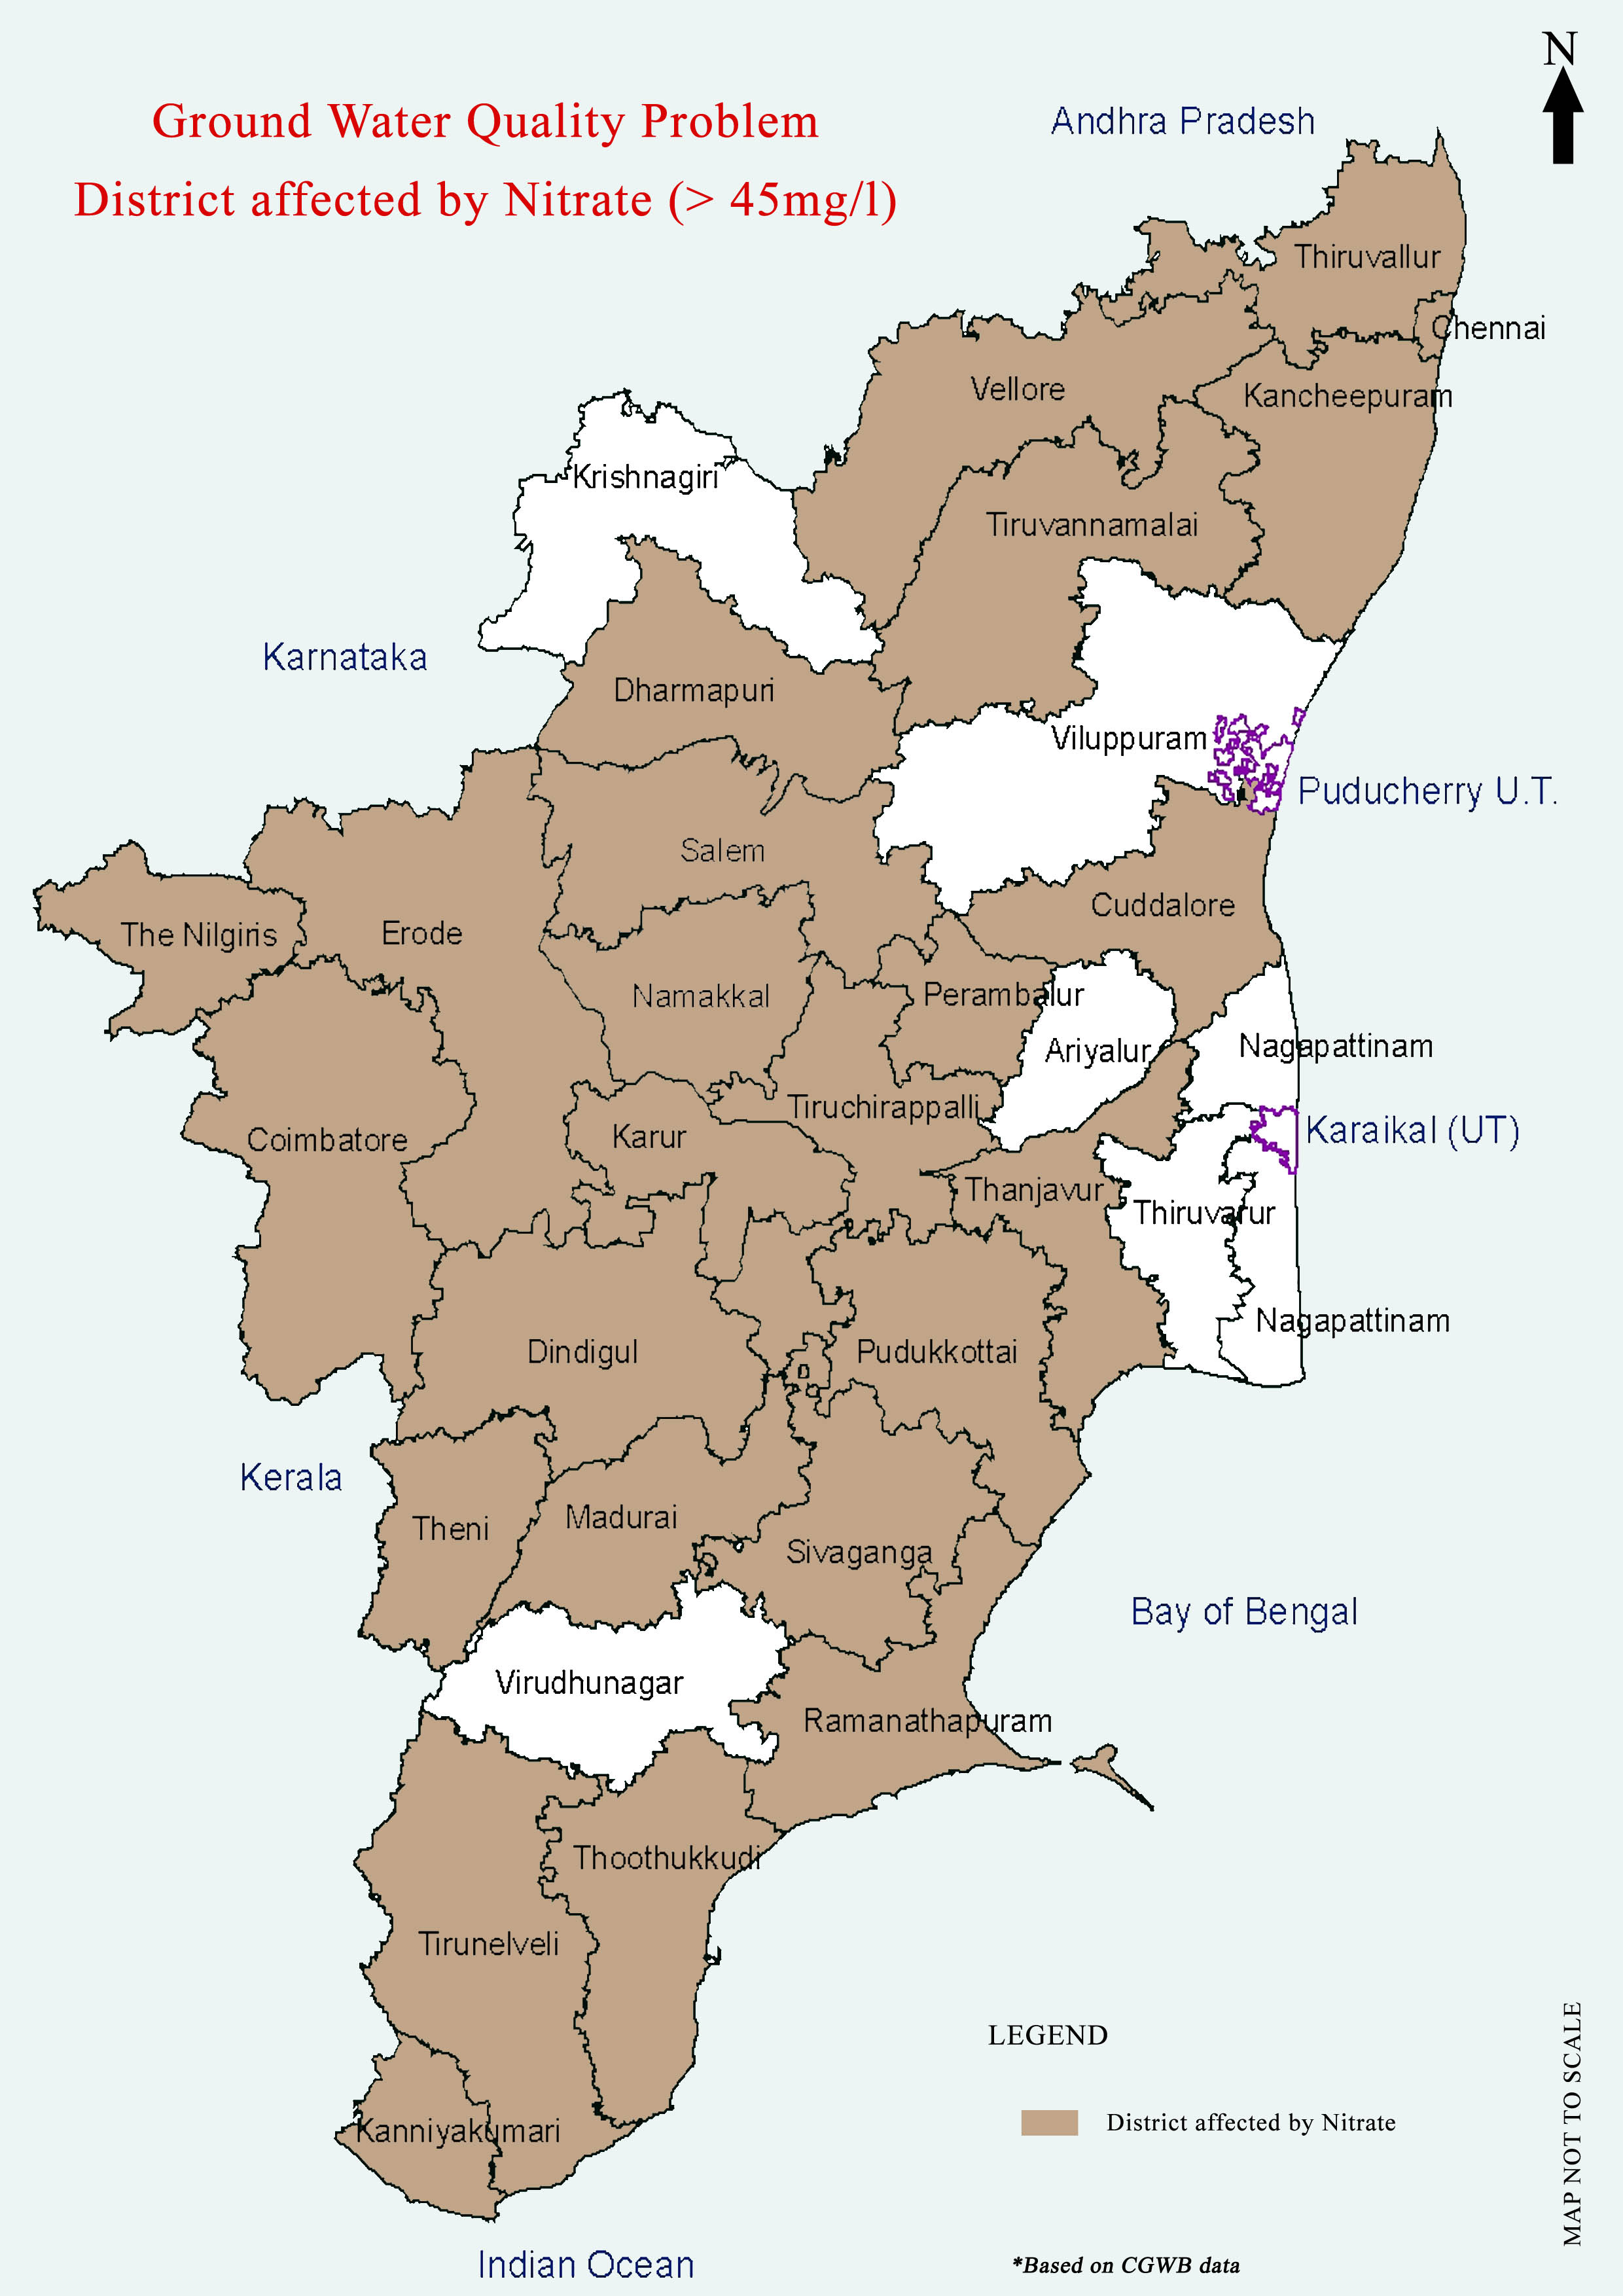 Maps On Groundwater Quality Tamil Nadu A Collection By Environmental Information System Centre, Department Of Environment, Government Of Tamil Nadu. India Water Portal